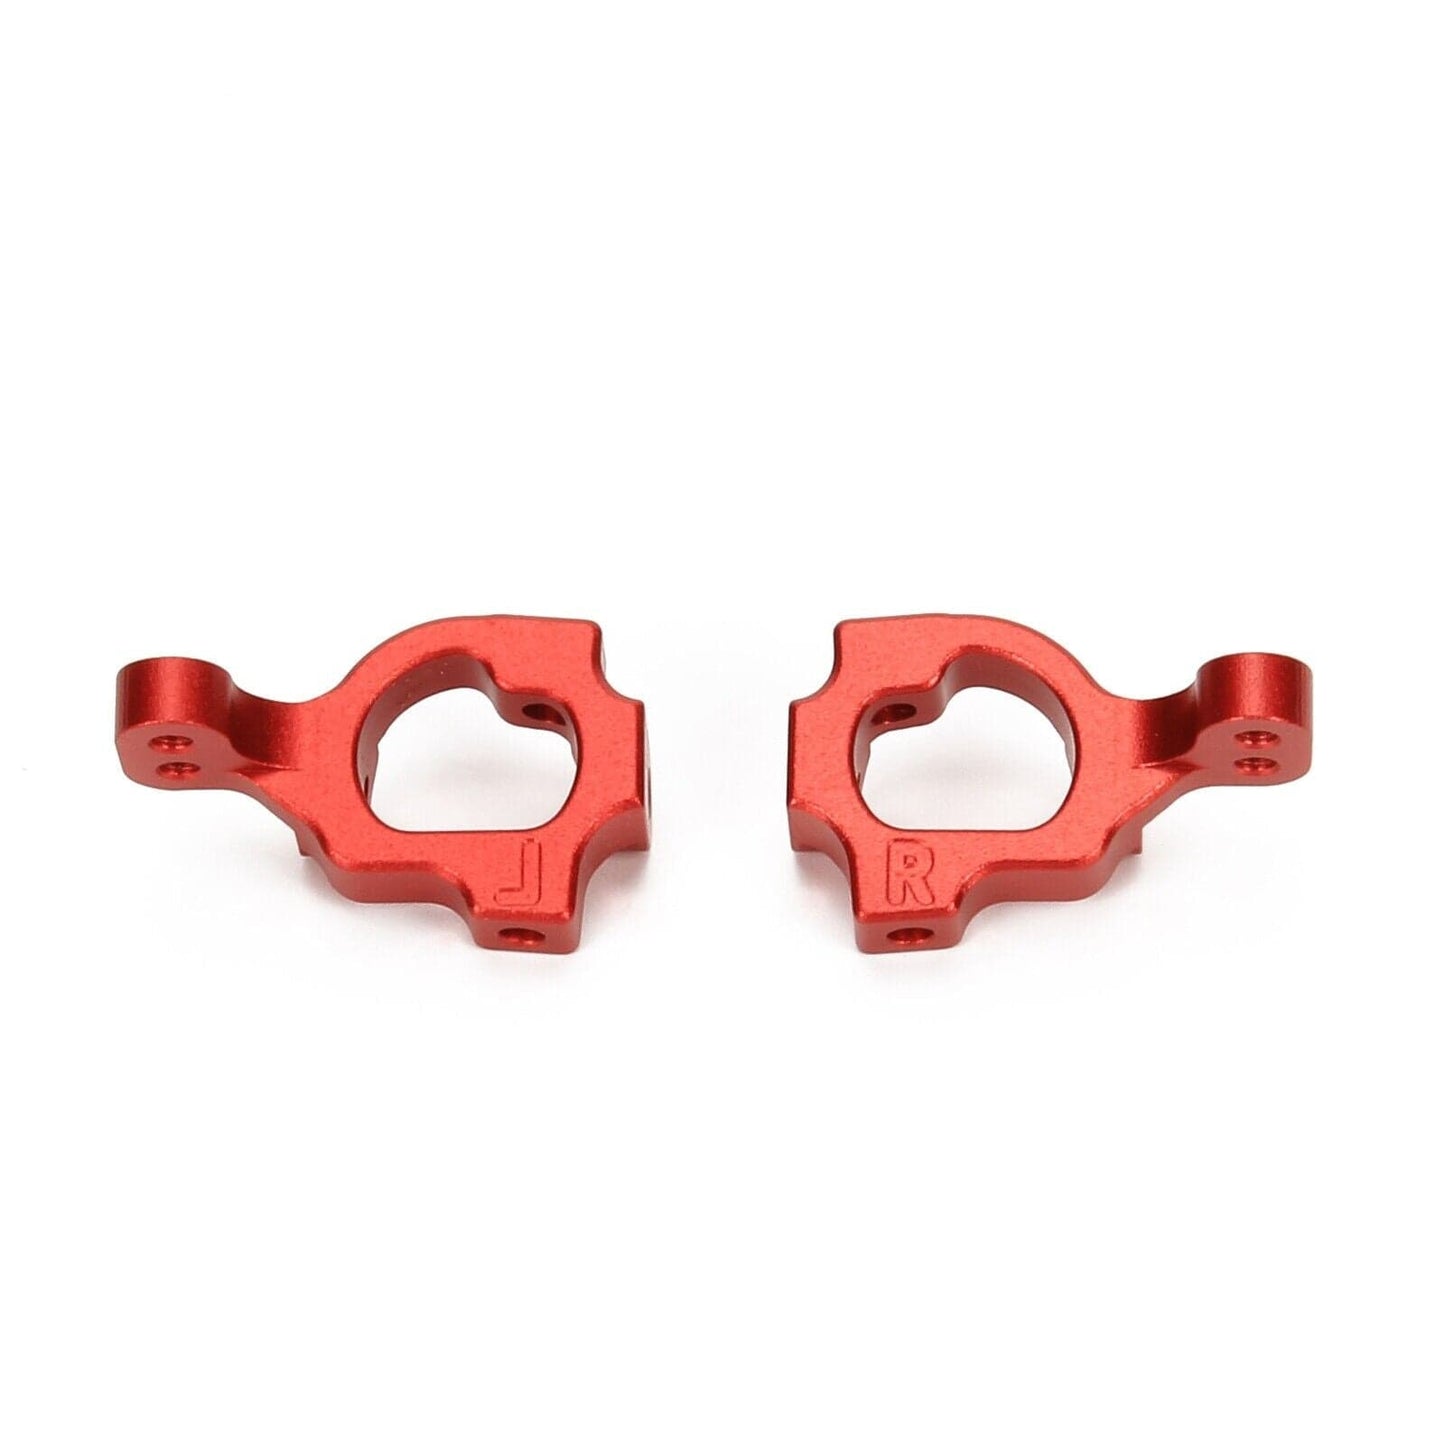 RCAWD Red Losi 22S 2WD Caster Block LOS234033-RCAWD